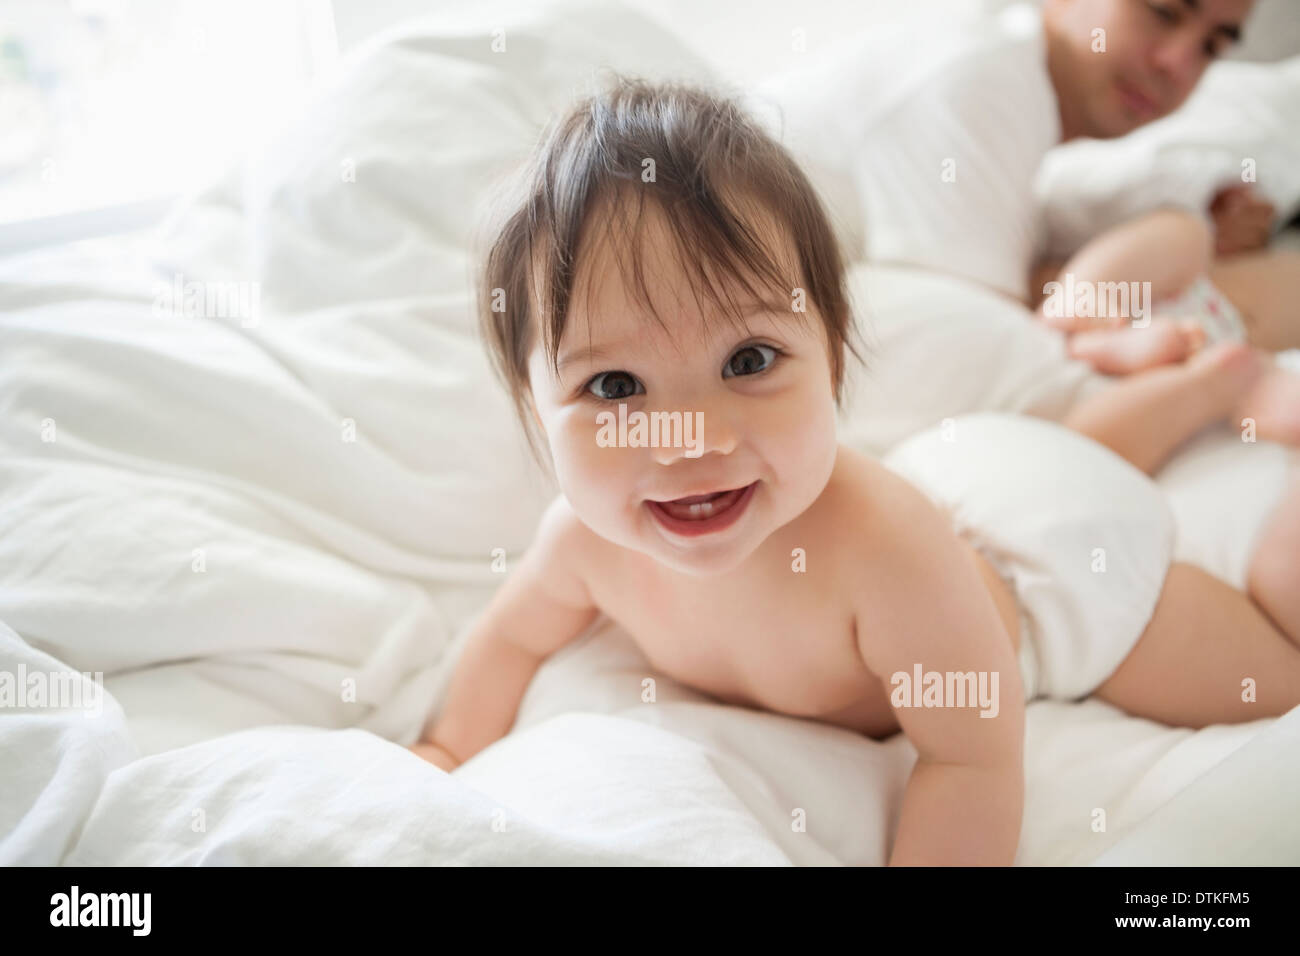 Baby girl crawling in bedsheets Stock Photo